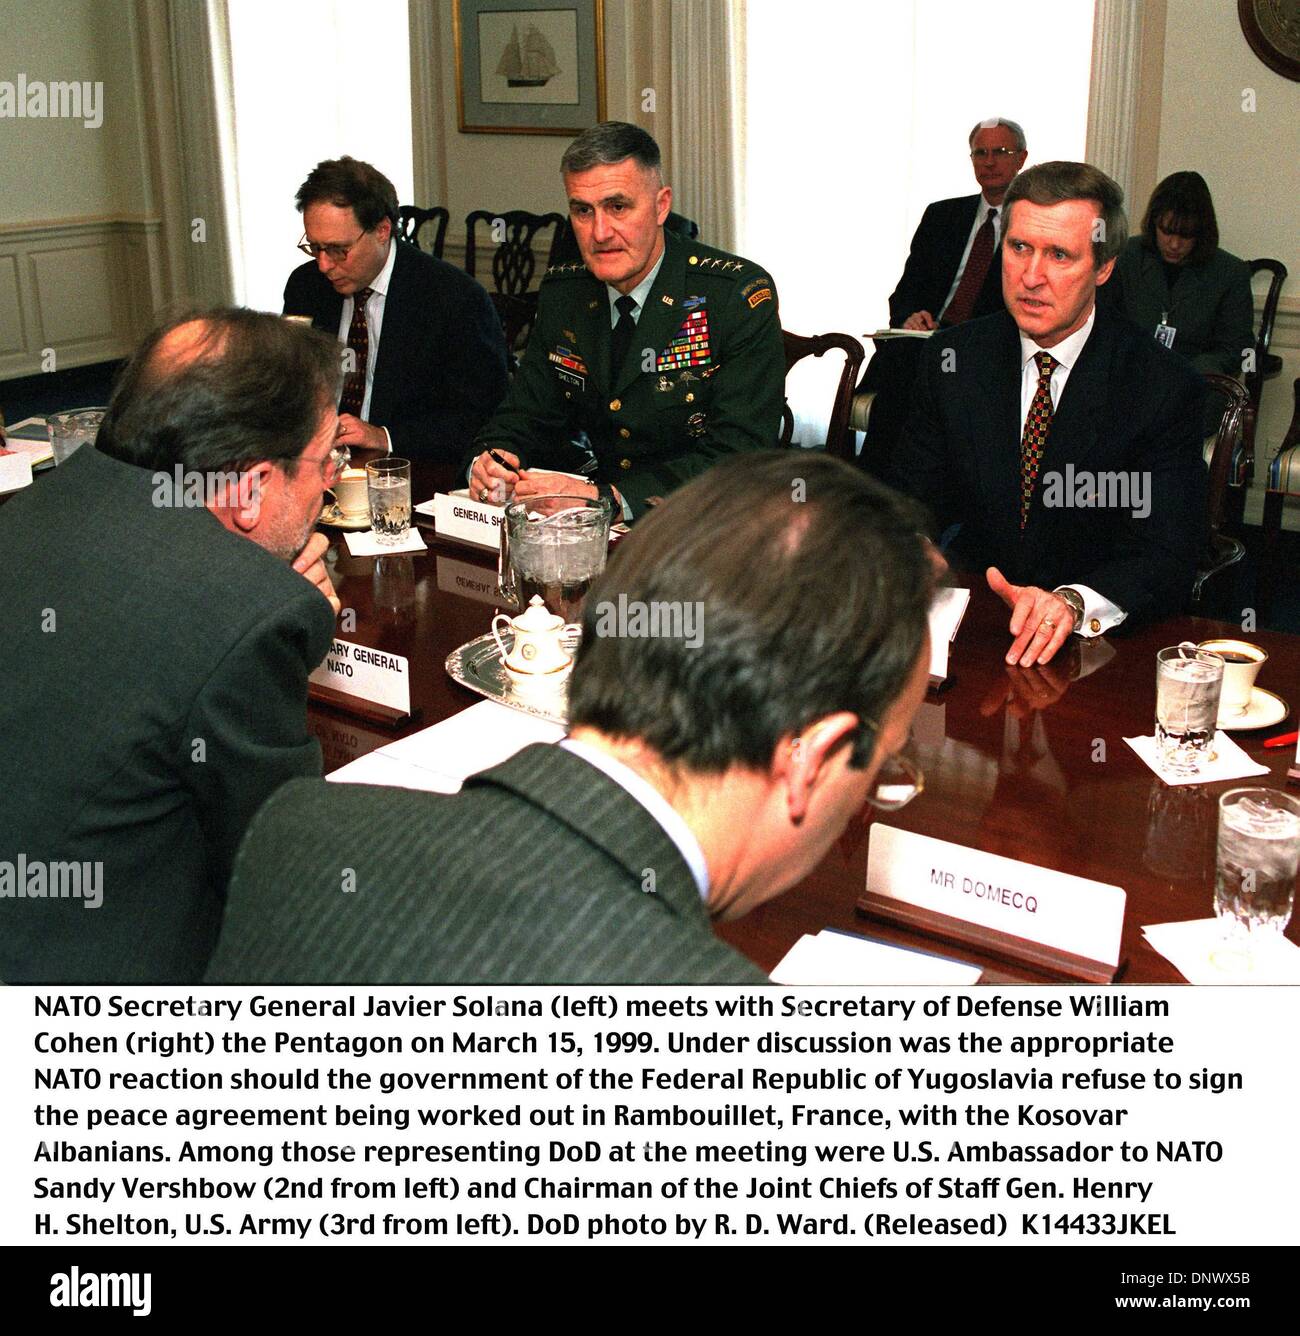 May 15, 1999 - K14433JKEL    03/15/99.990315-D-9880W-016..NATO Secretary General Javier Solana (left)  meets  with Secretary of Defense William Cohen (right) the Pentagon on March 15, 1999.  Under discussion was the appropriate NATO reaction should the government of the Federal Republic of Yugoslavia refuse to sign the peace agreement being worked out in Rambouillet, France, with t Stock Photo